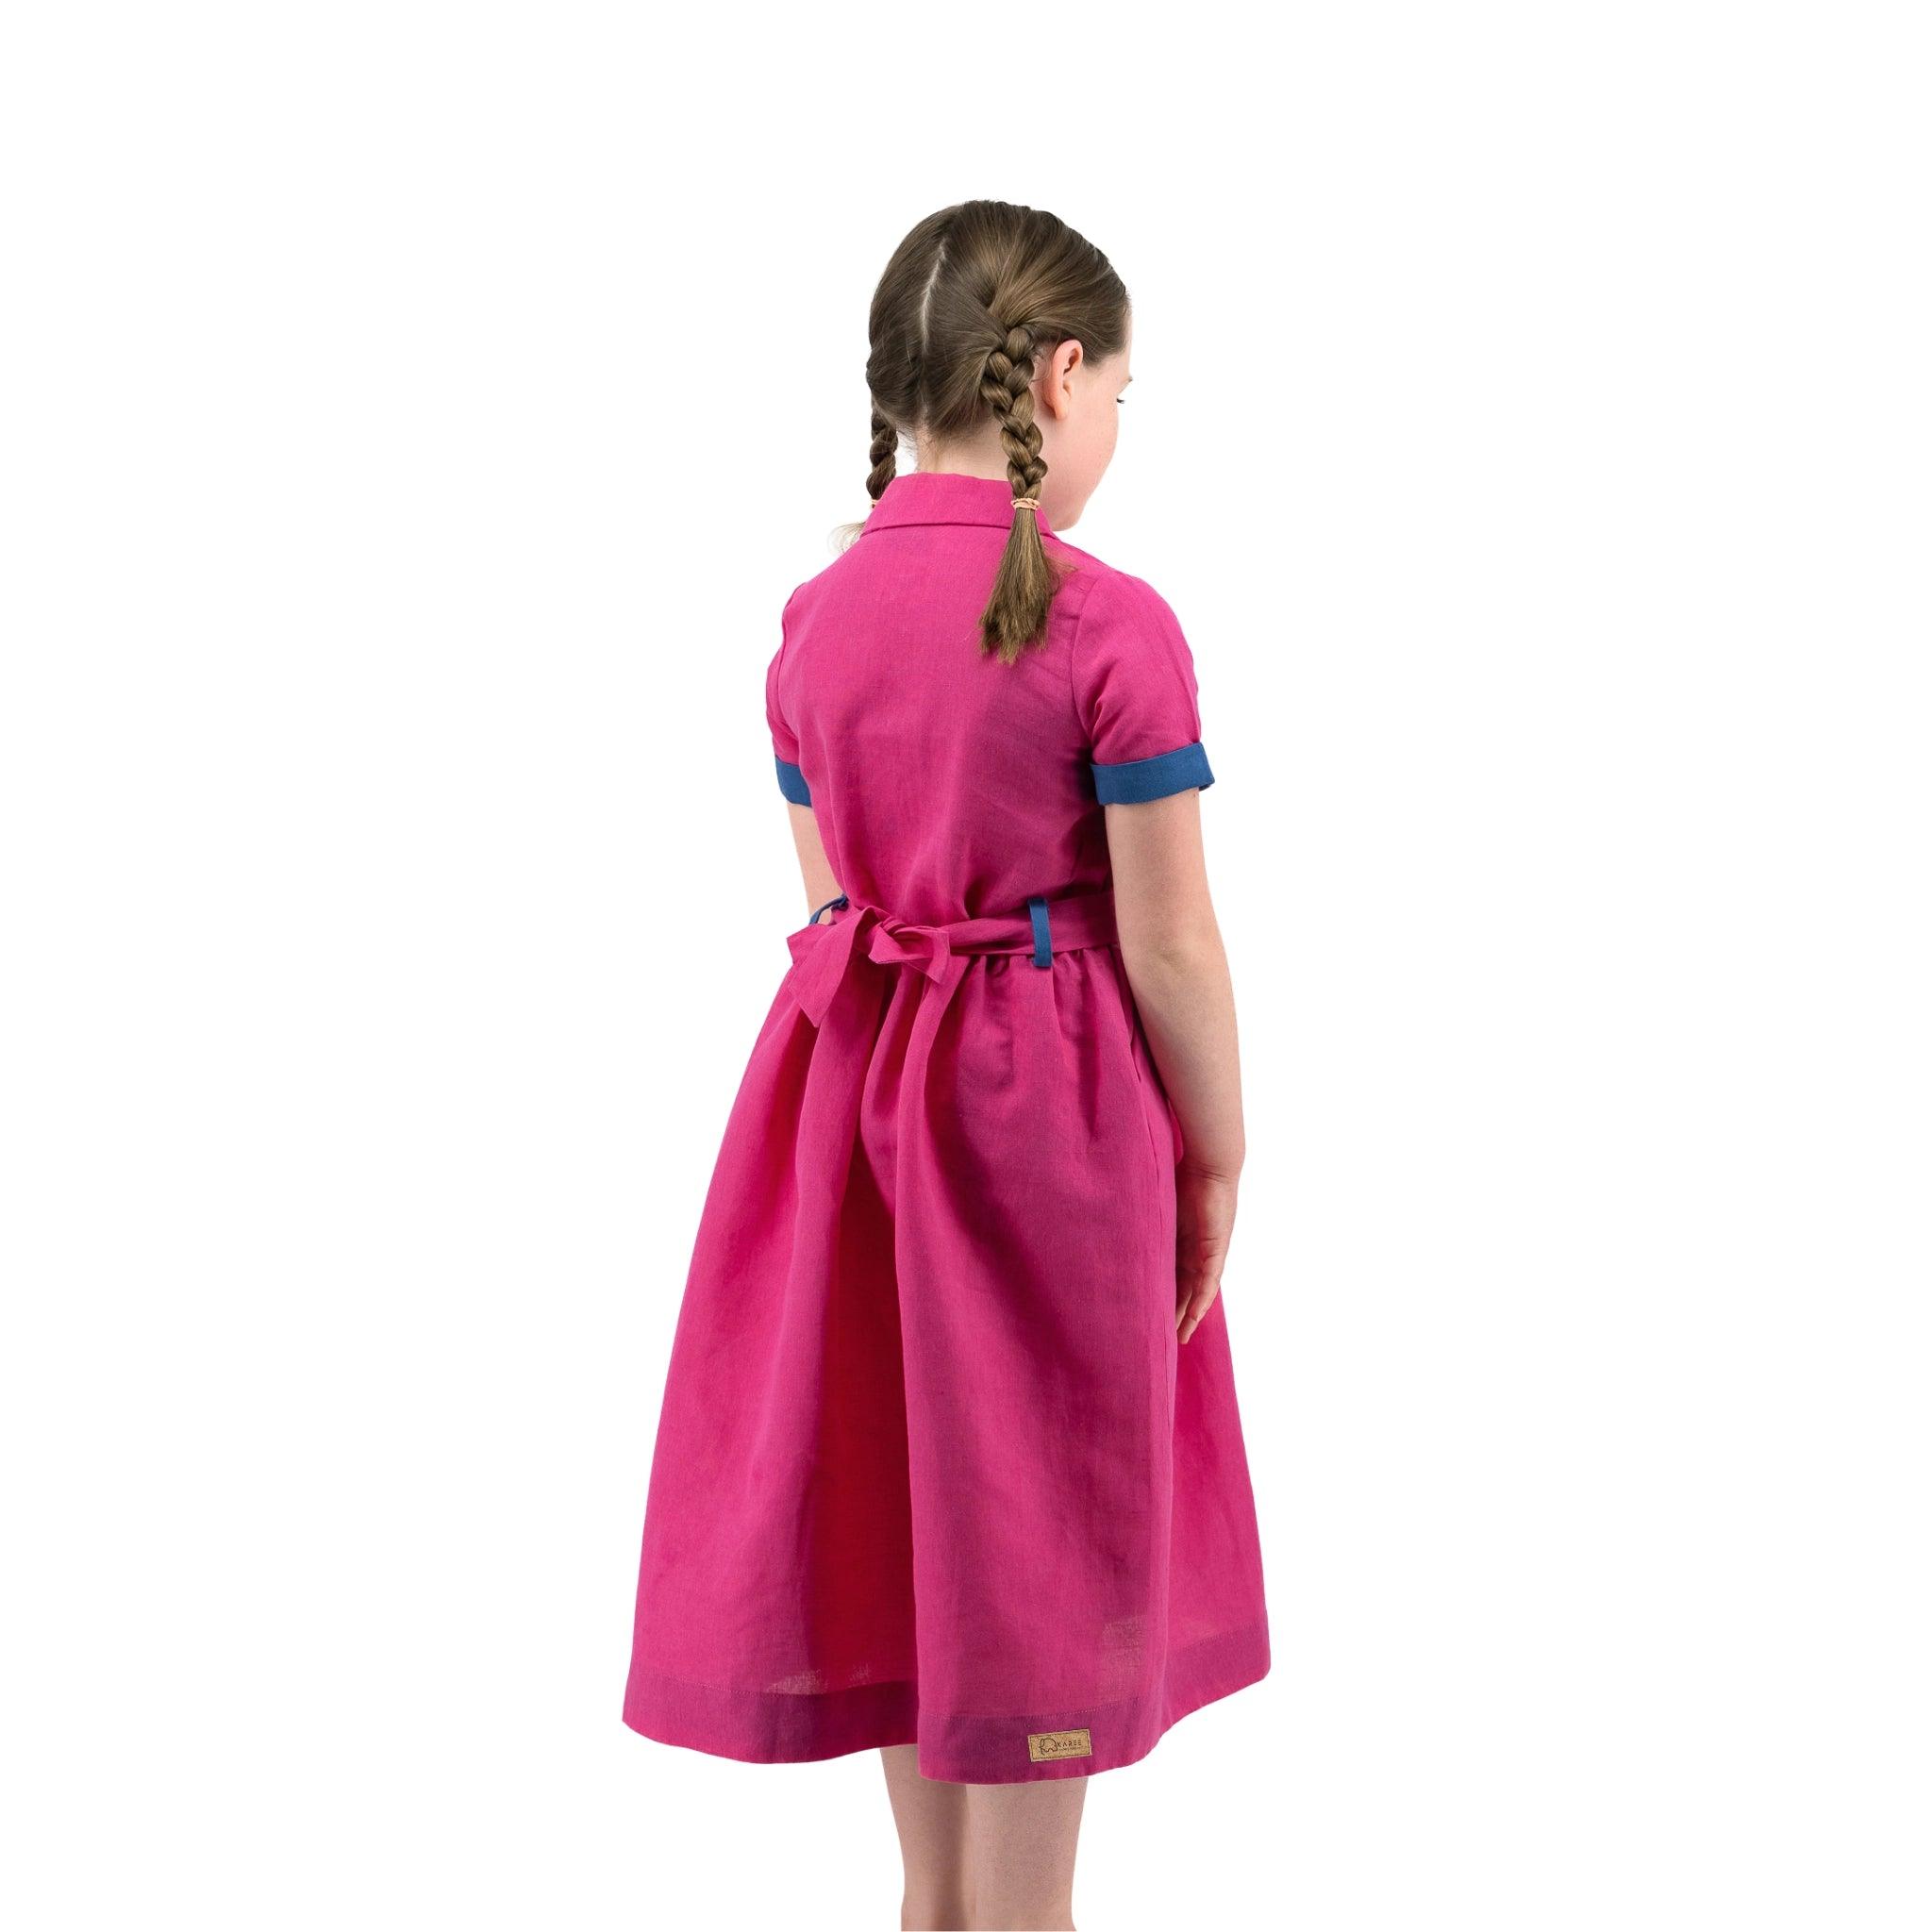 A young girl in a Karee fuchsia purple linen dress with a bow tied at the back, standing in a side pose, looking to her left, isolated on a white background.